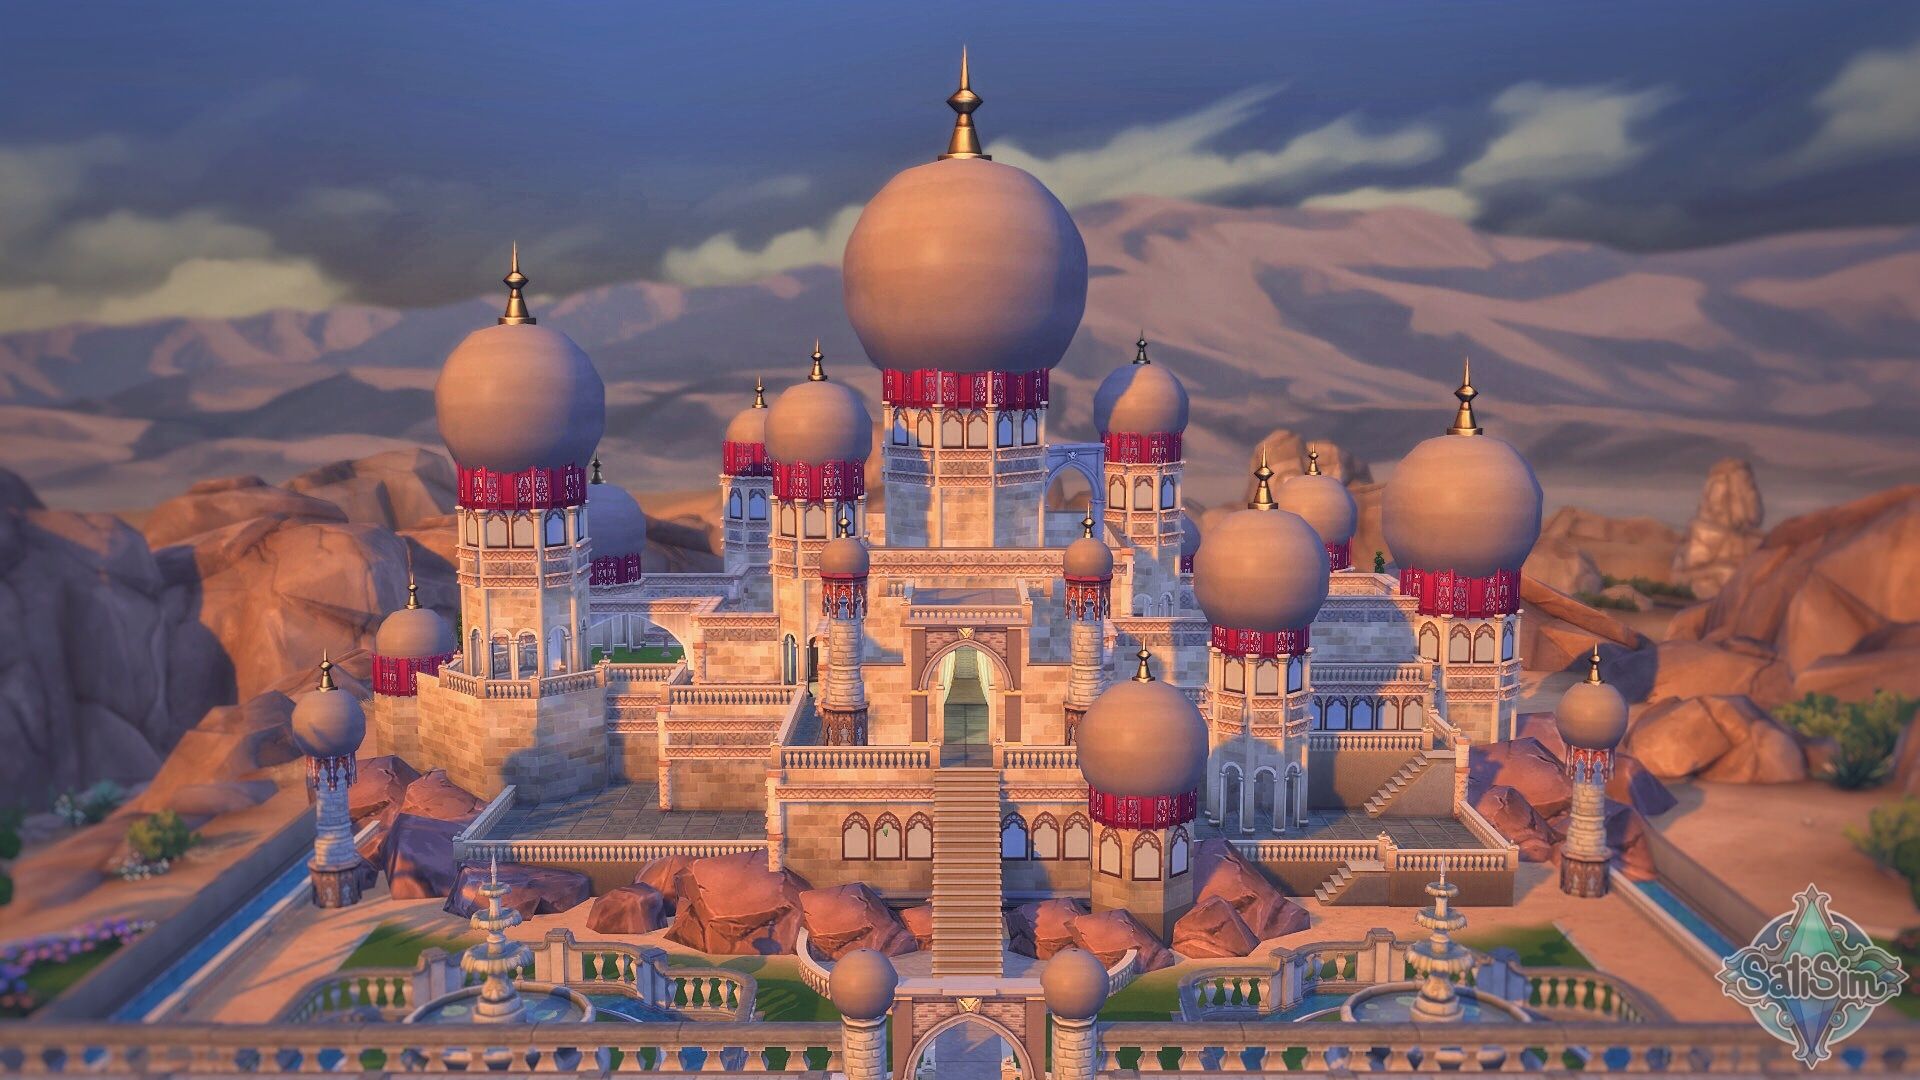 I built the Sultans Palace from Disney's Aladdin on a 50x50 Lot without CC! 'Palace of Agrabah' is soon available under Origin ID: SatiSim